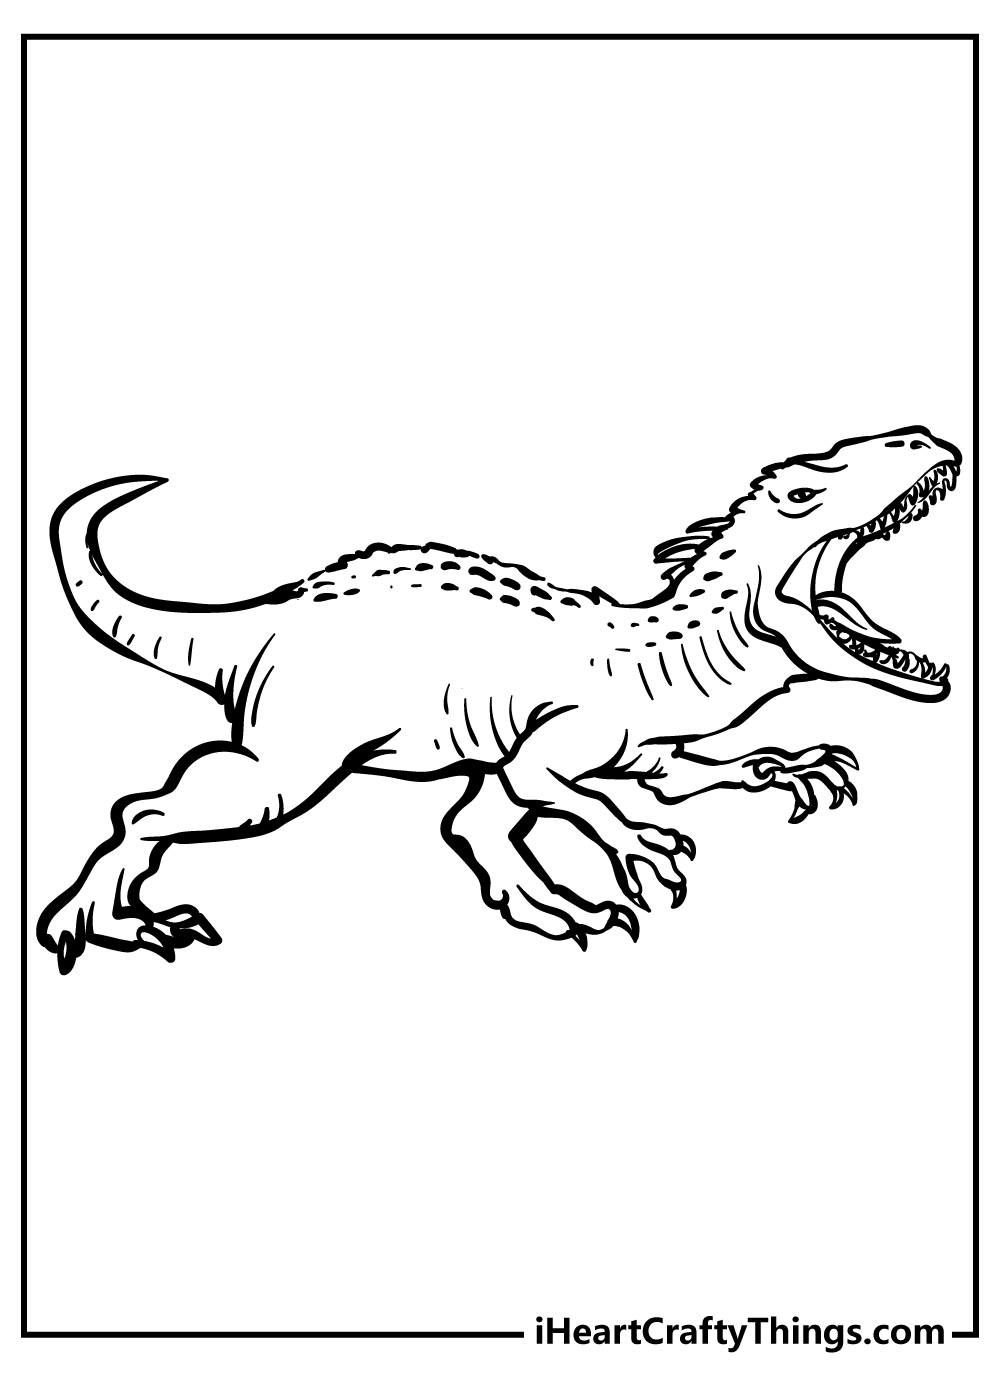 Printable Jurassic World Coloring Pages Updated 20